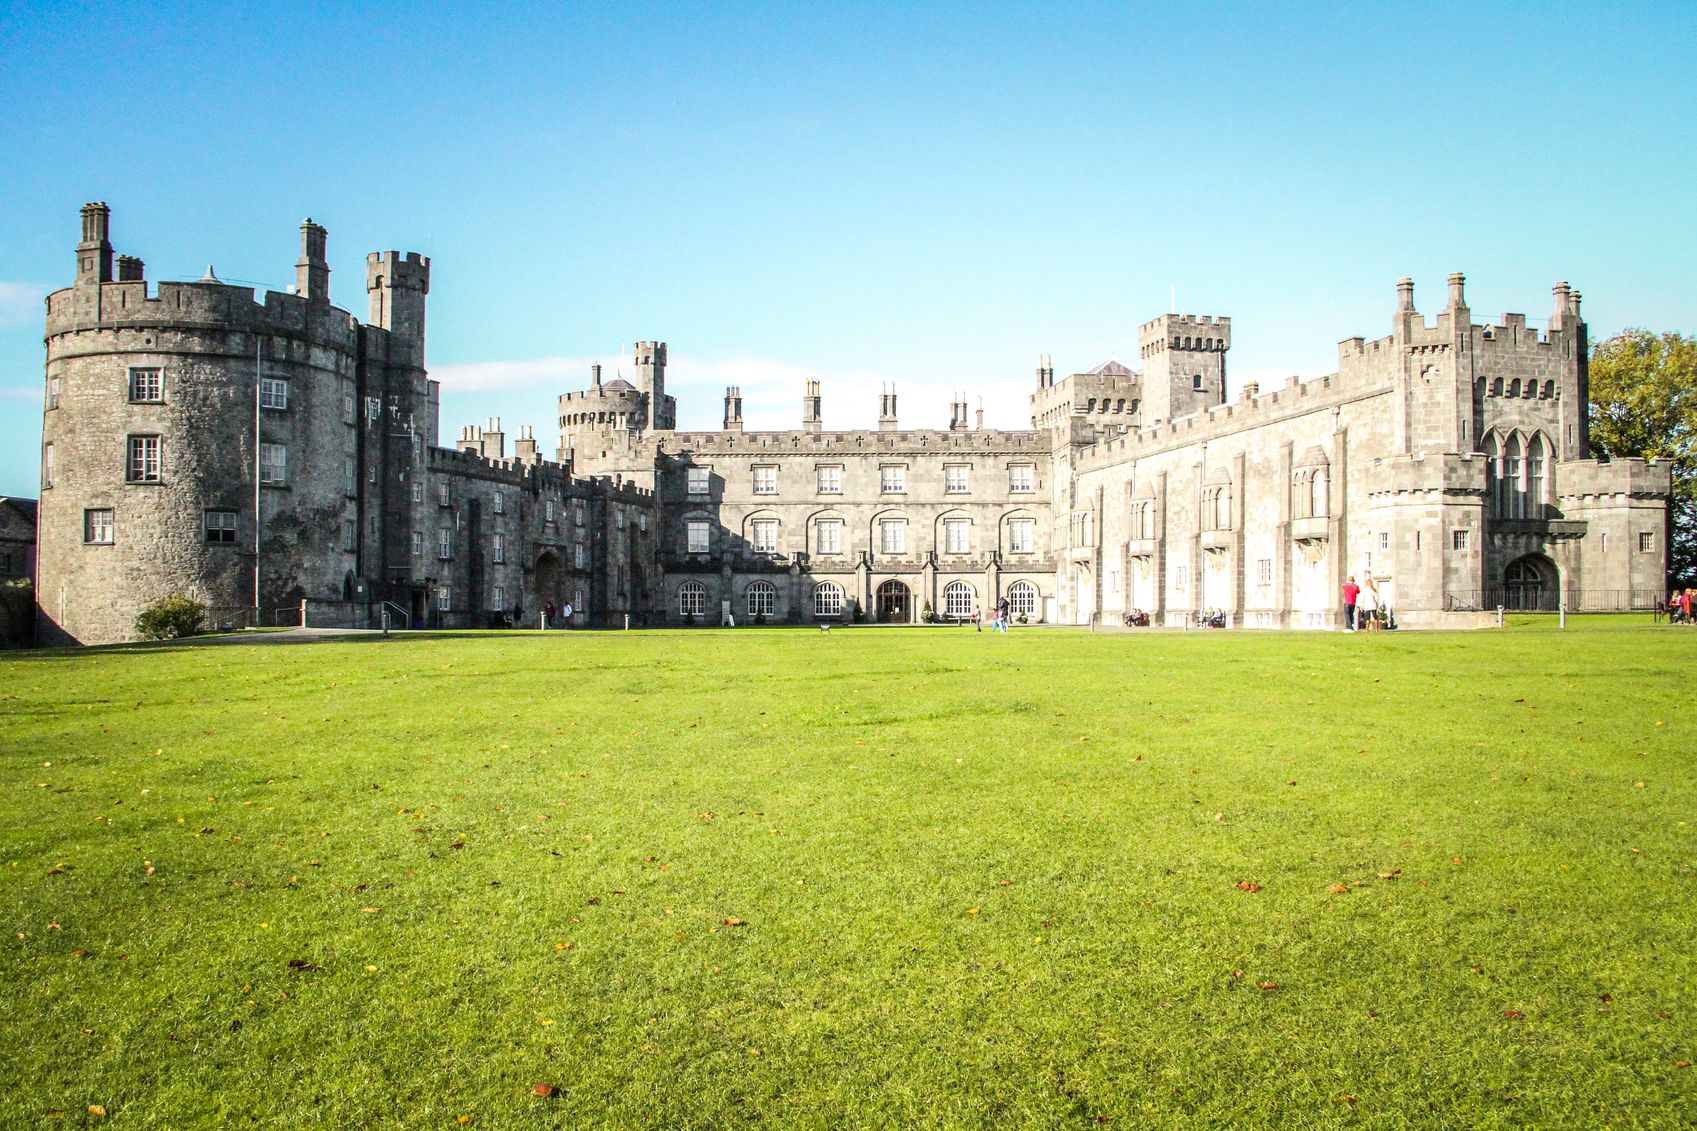 Kilkenny, Ireland - October 31, 2013 : People are walking around a main tourist attraction in Ireland, the Kilkenny Castle. On the right a man with a red top is taking a picture.